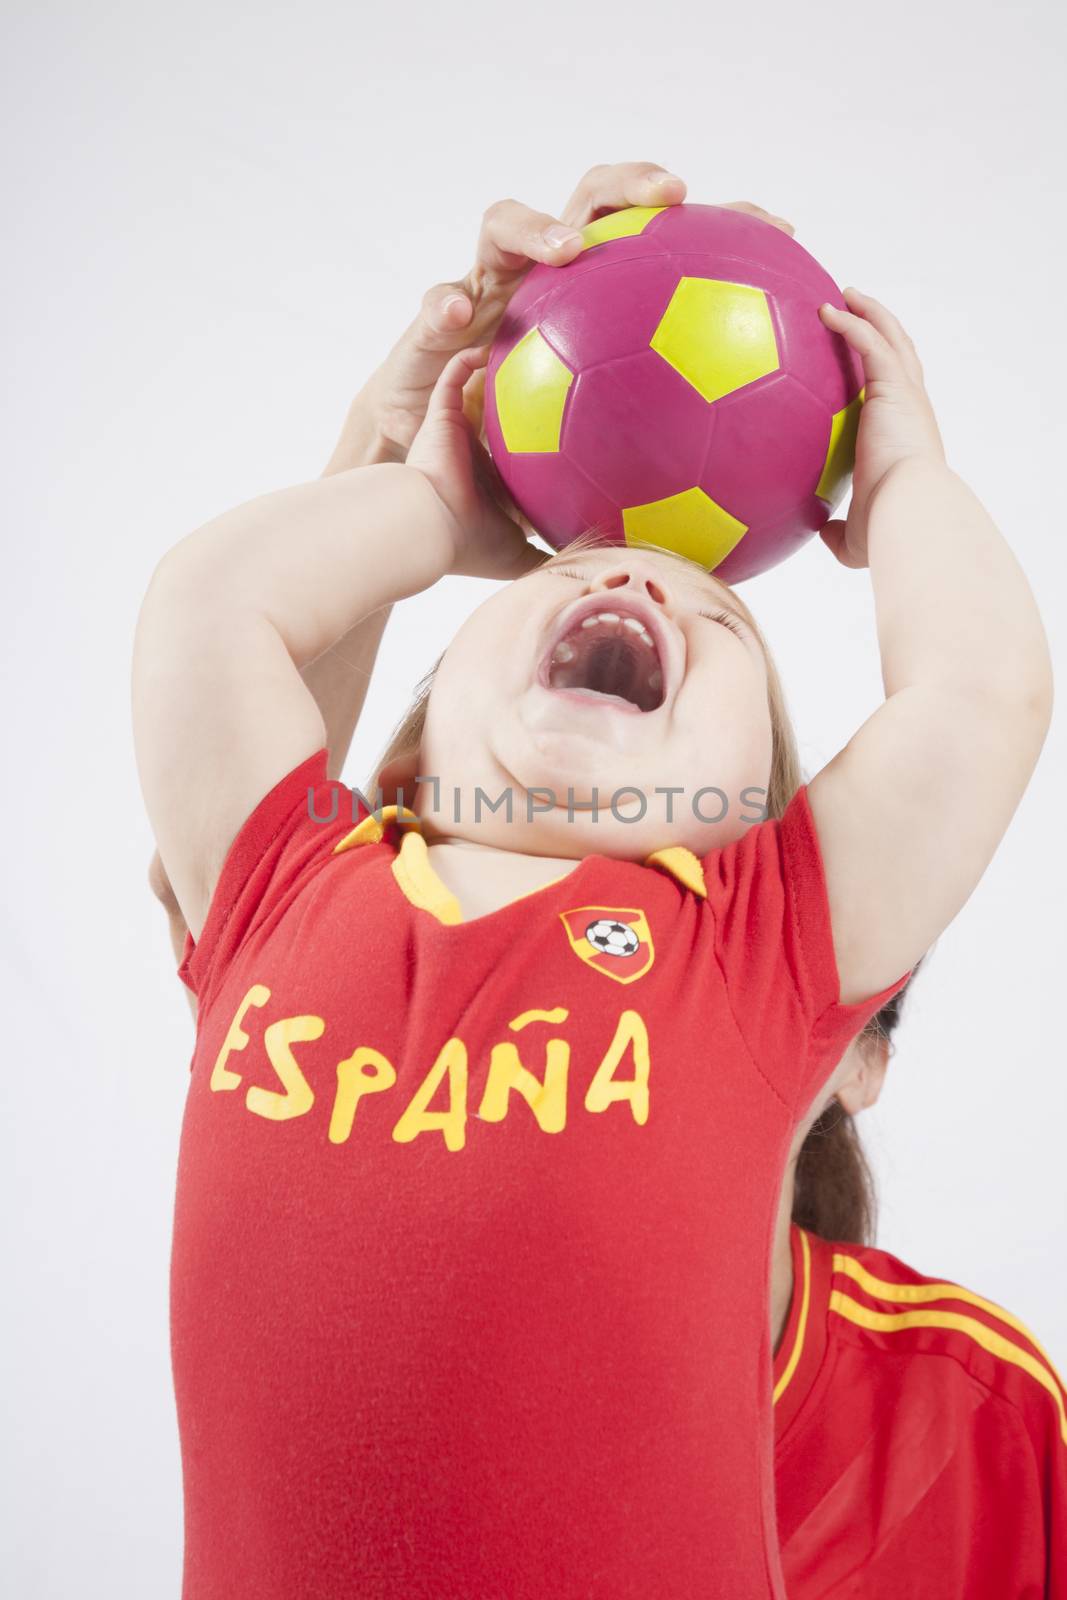 blonde baby sixteen month old and mother with red shirt of Spanish soccer team taking ball